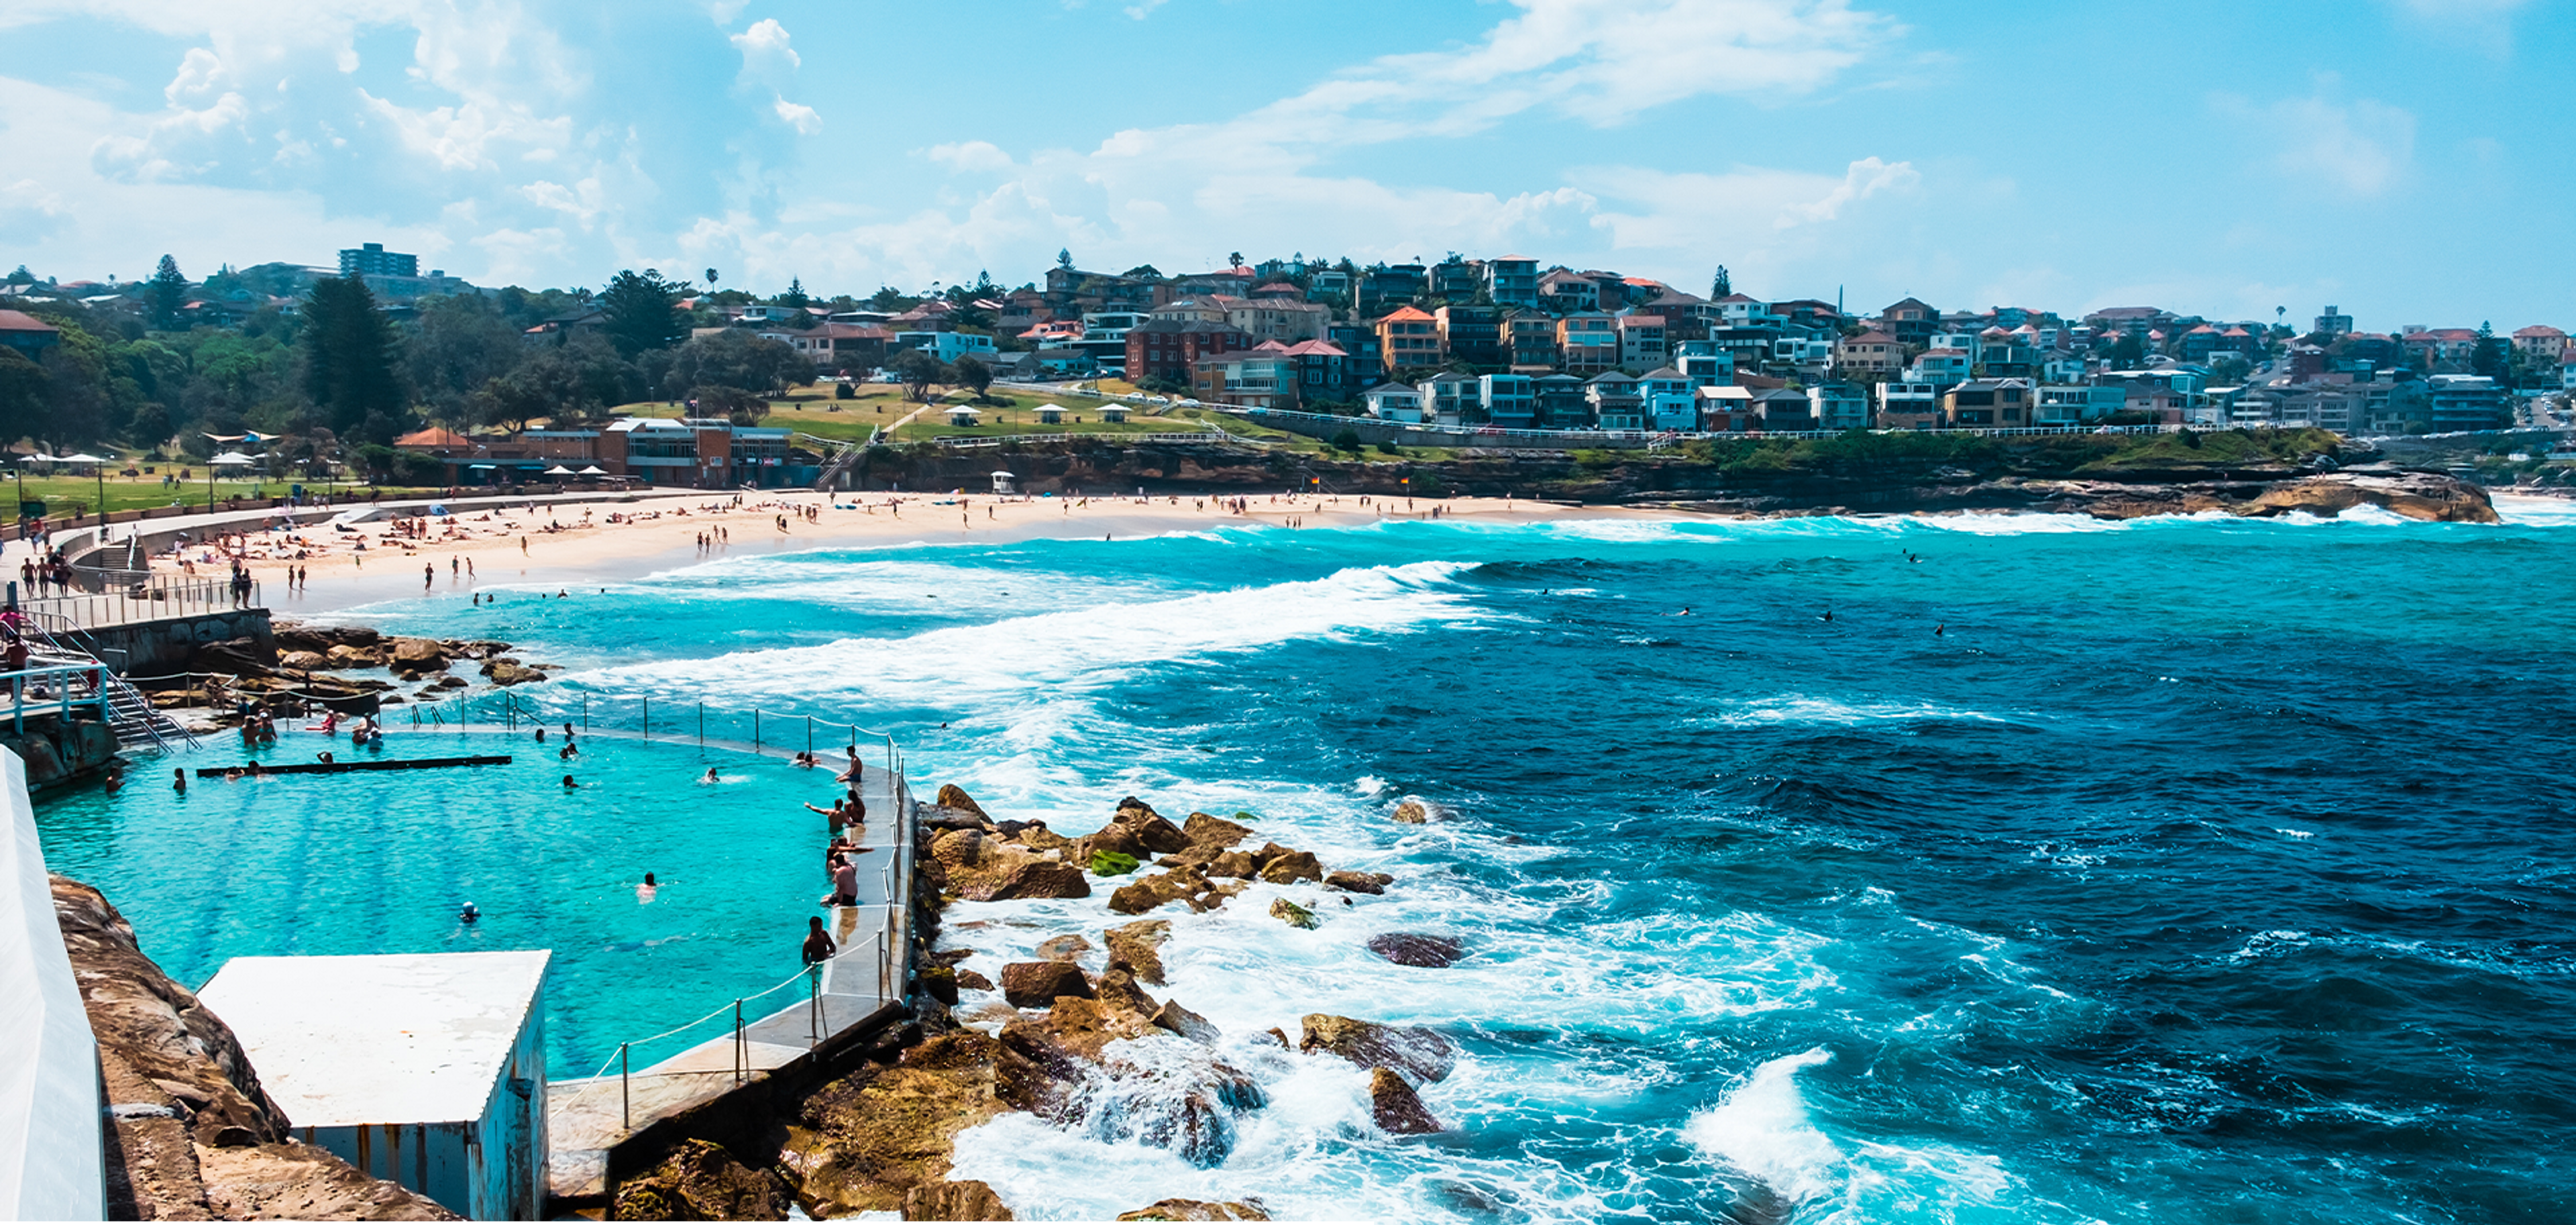 Sydney Holiday Packages